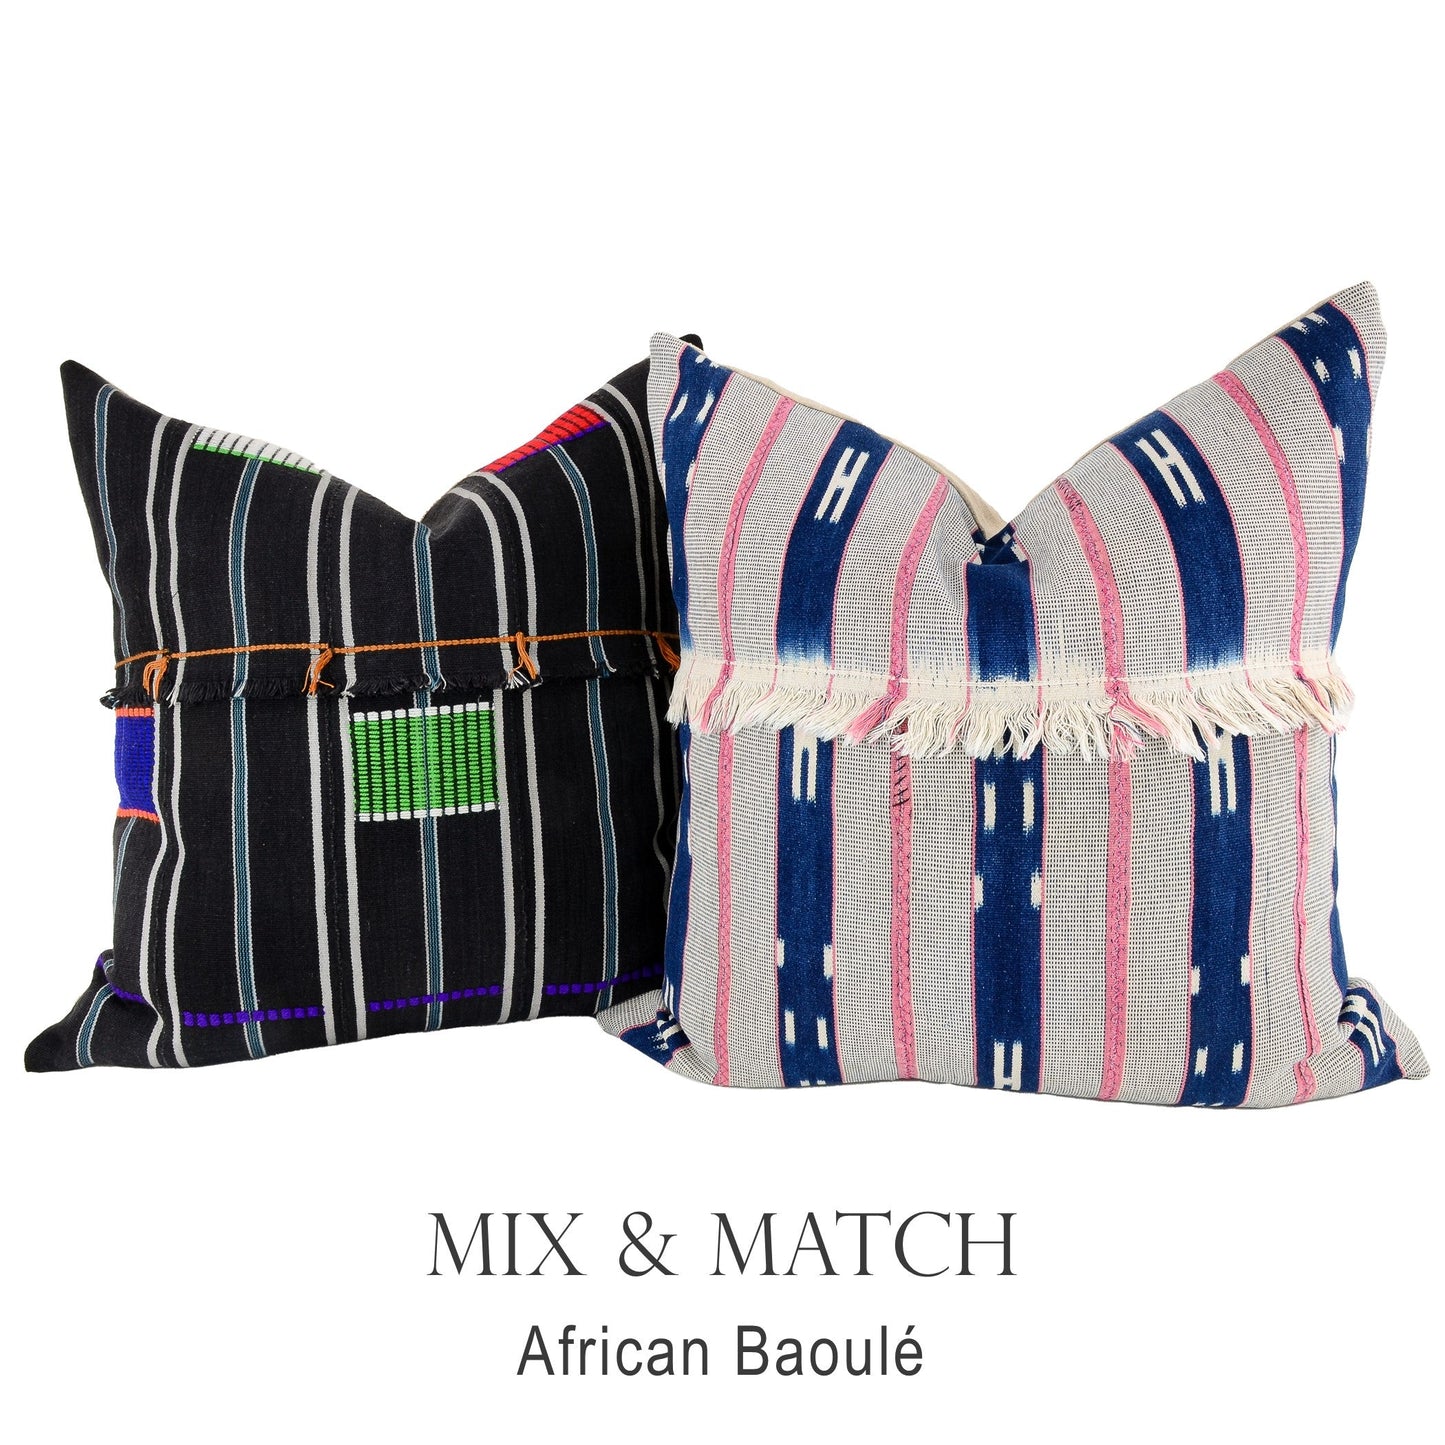 Mix and match pillows from different fabrics and colors